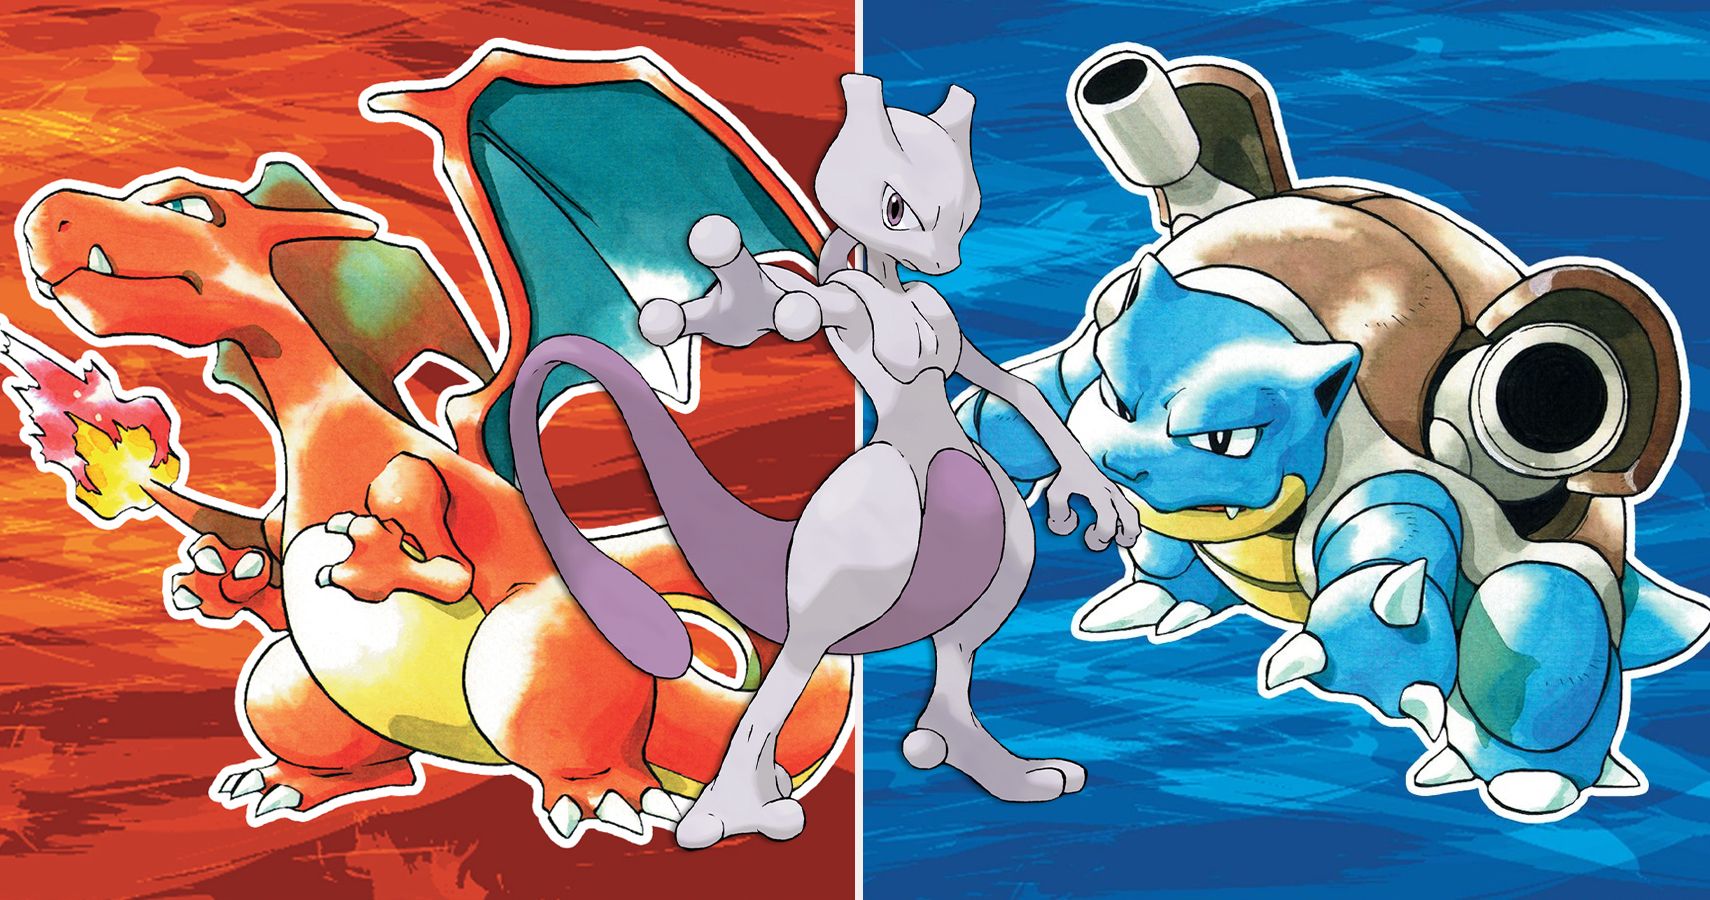 How Easy is Pokemon Red if every Pokemon is Electric-Type? 